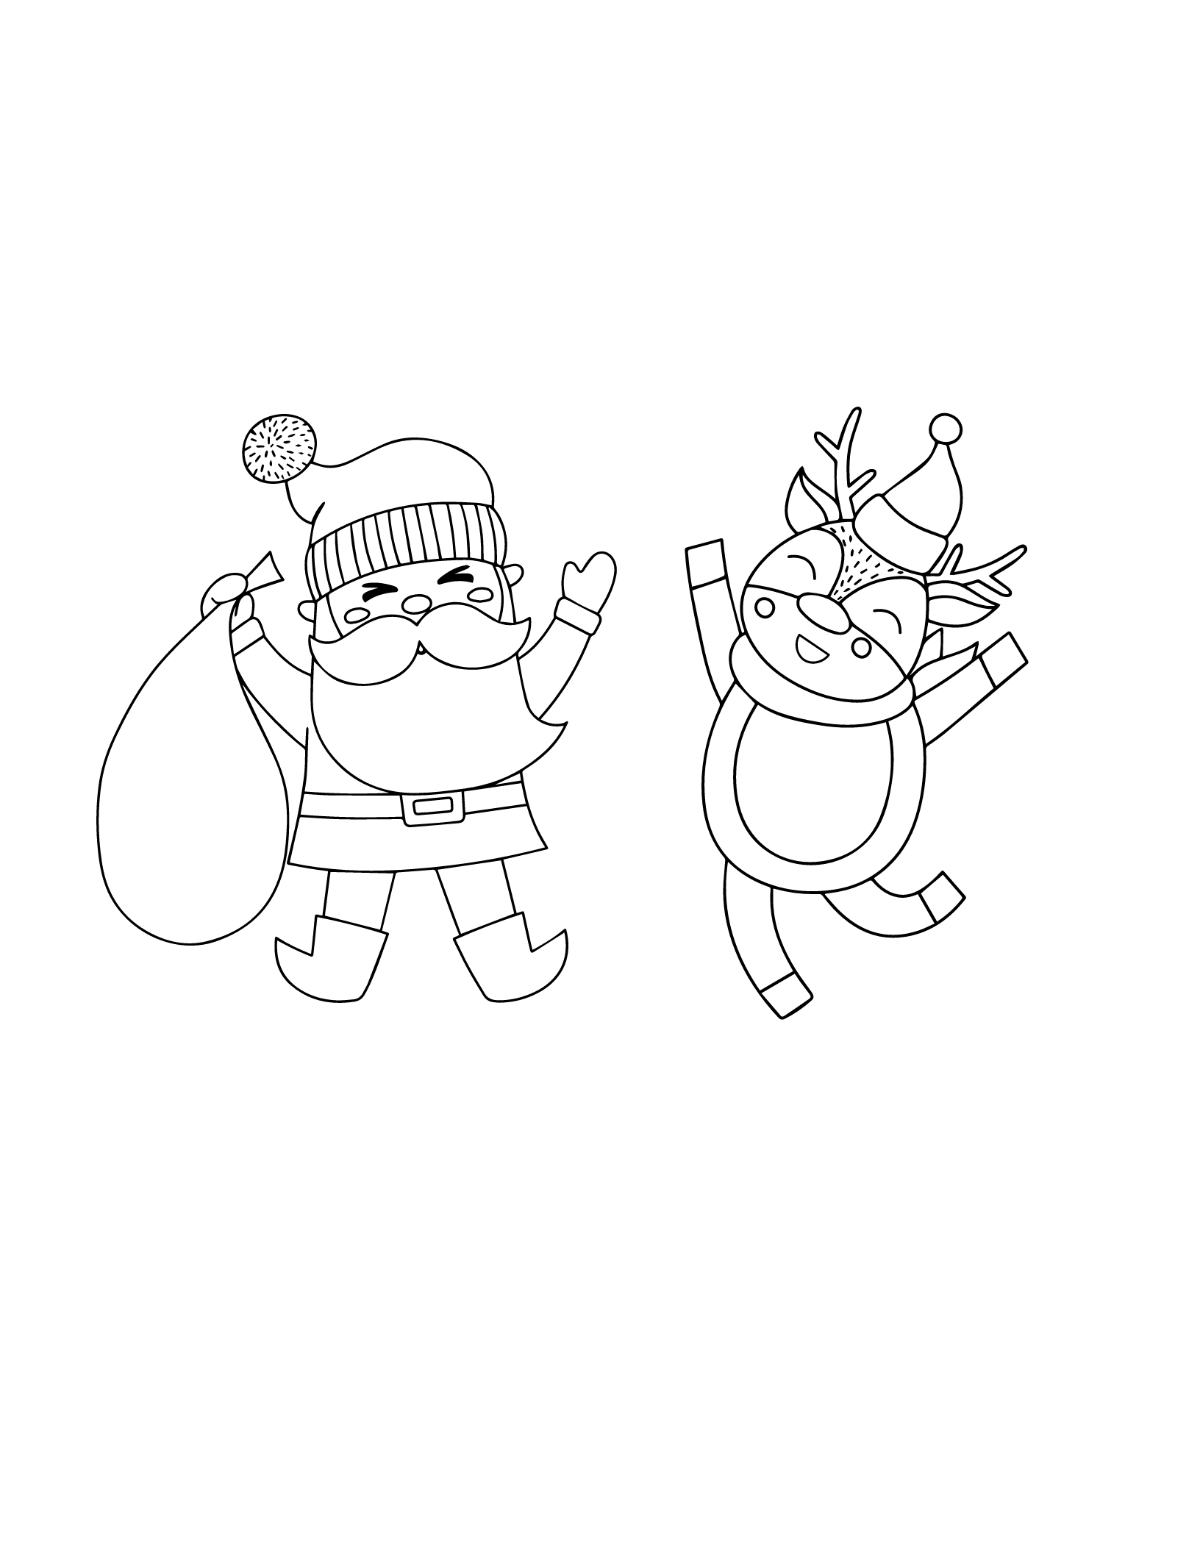 Cute Christmas Coloring Page